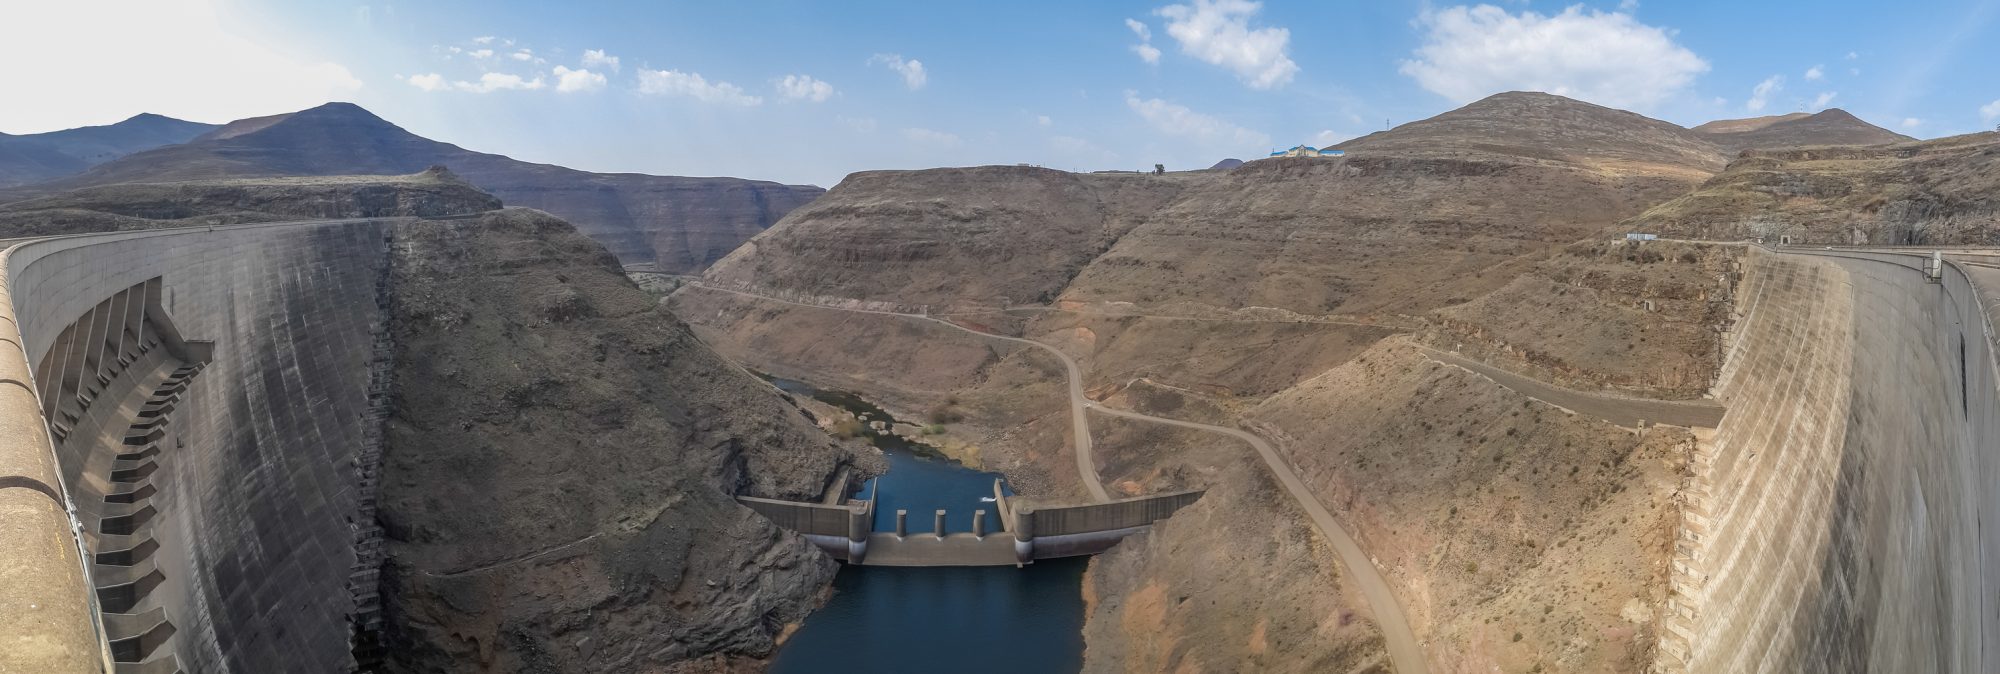 Panorama of hydroelectric Katse Dam power plant in Lesotho, Africa